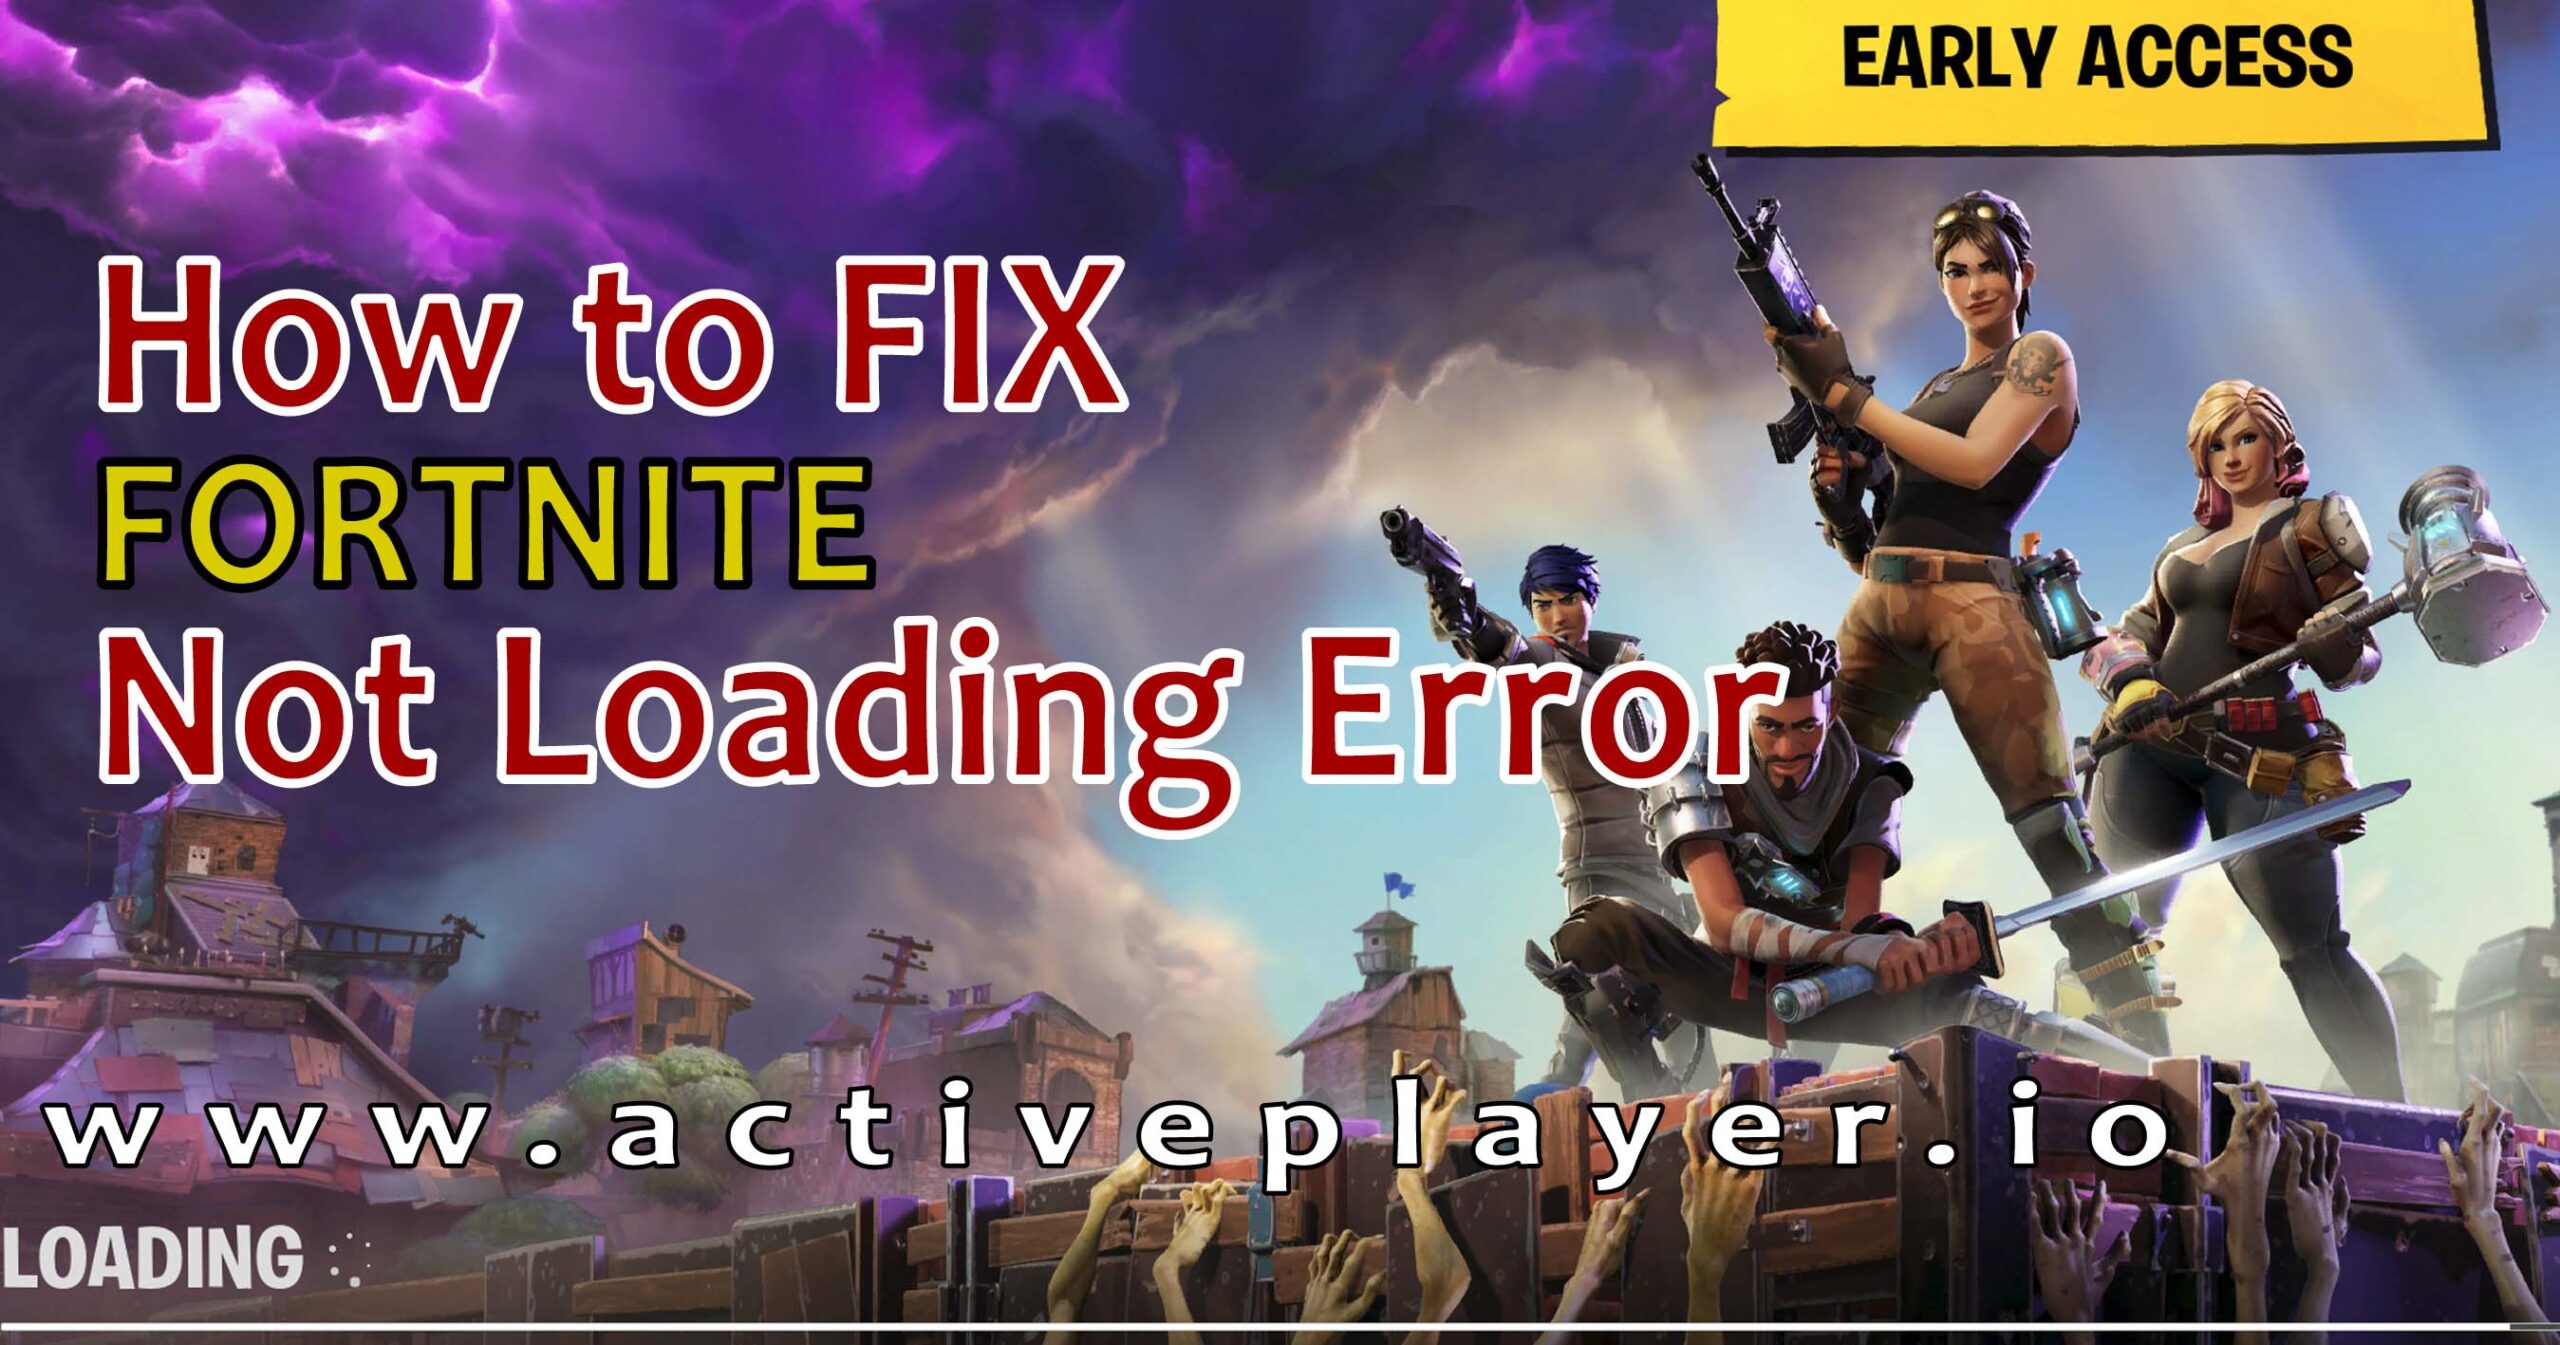 https://activeplayer.io/wp-content/uploads/2022/07/How-to-Fix-Fortnite-Not-Loading-Error-scaled.jpg